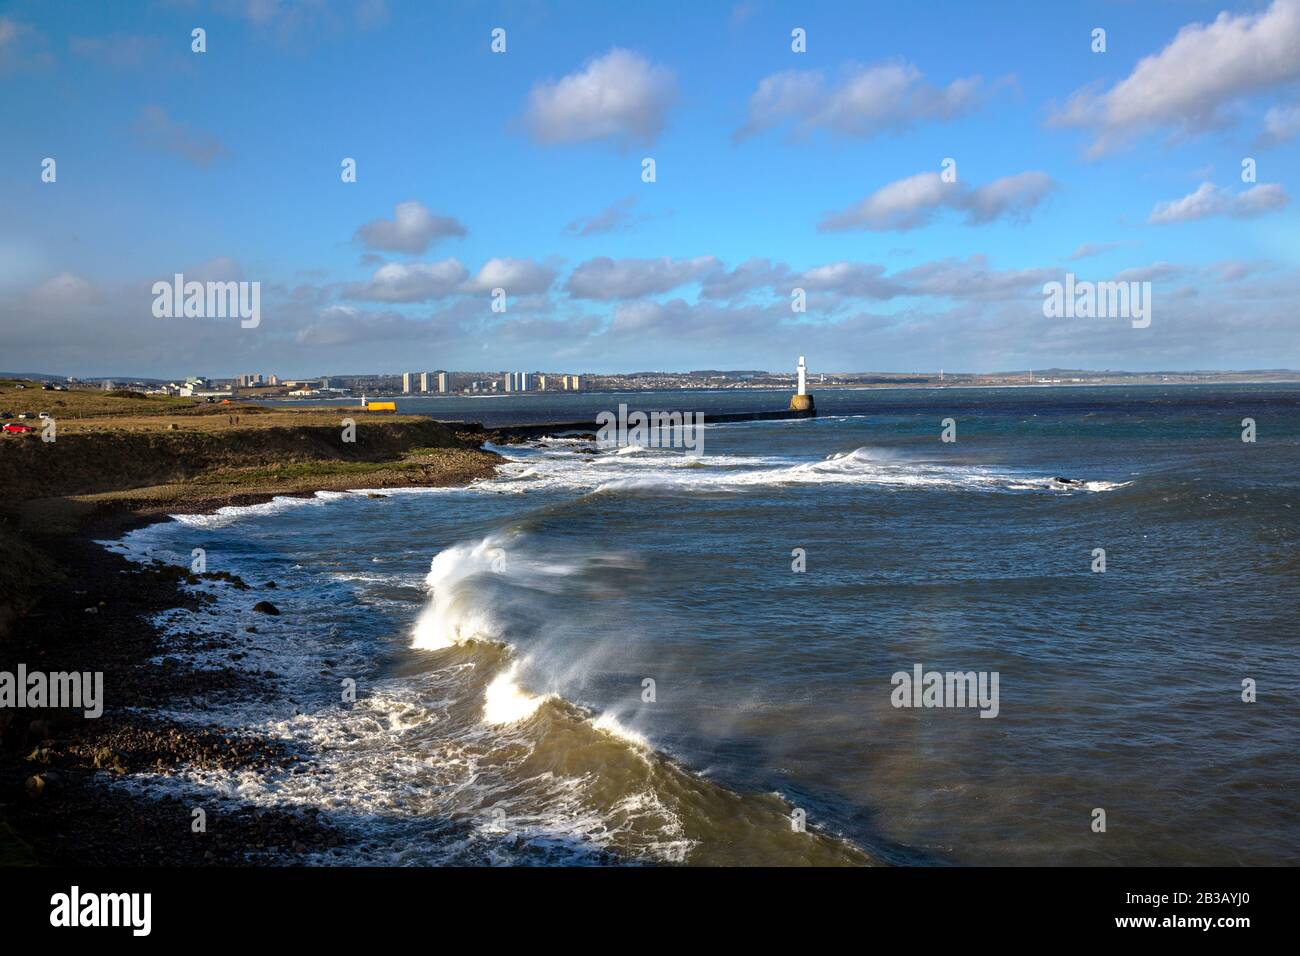 Several photos of Aberdeen South Breakwater, Girdleness Lighthouse, Greyhope Bay, and Aberdeen Harbour, big waves breaking, and vessel exiting port. Stock Photo